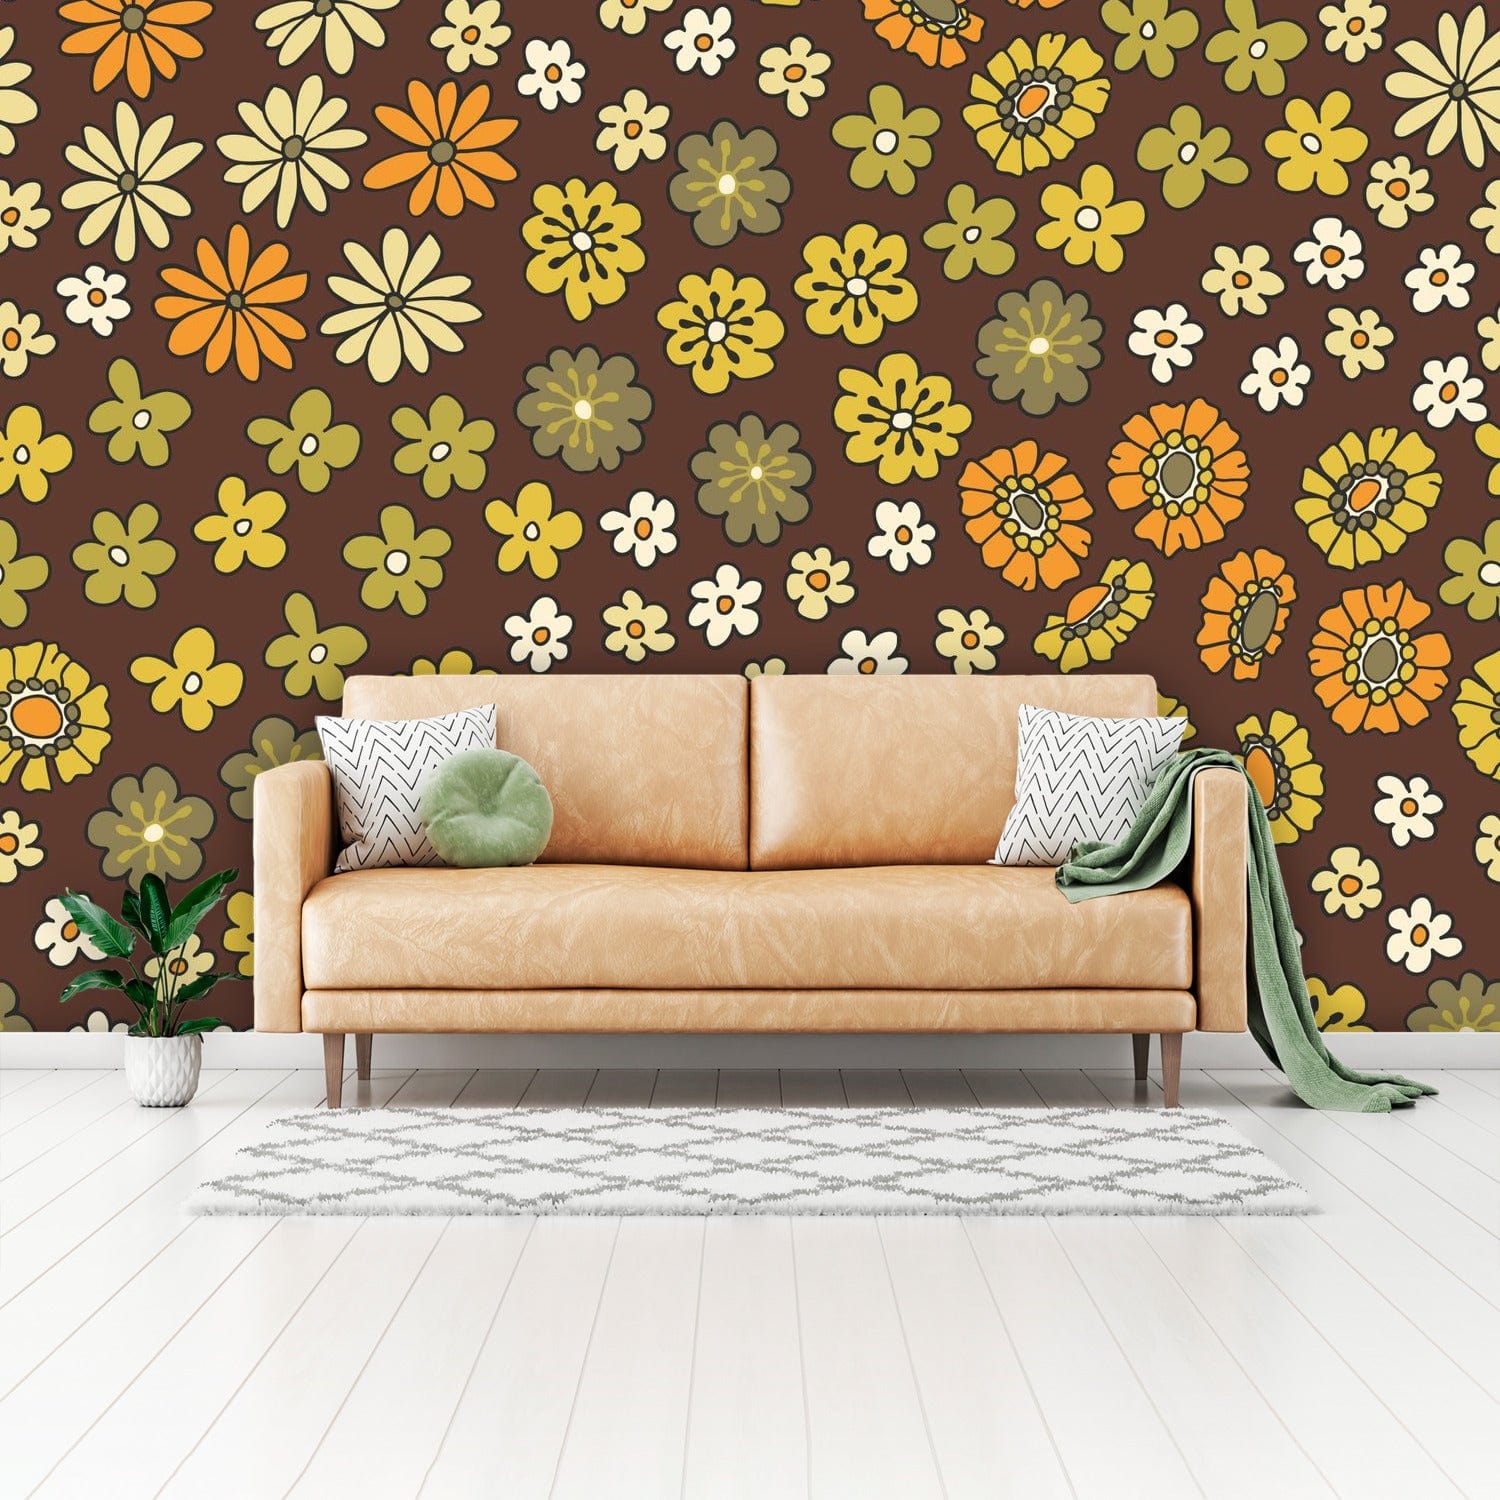 S mod daisy floral peel and stick wall mural â